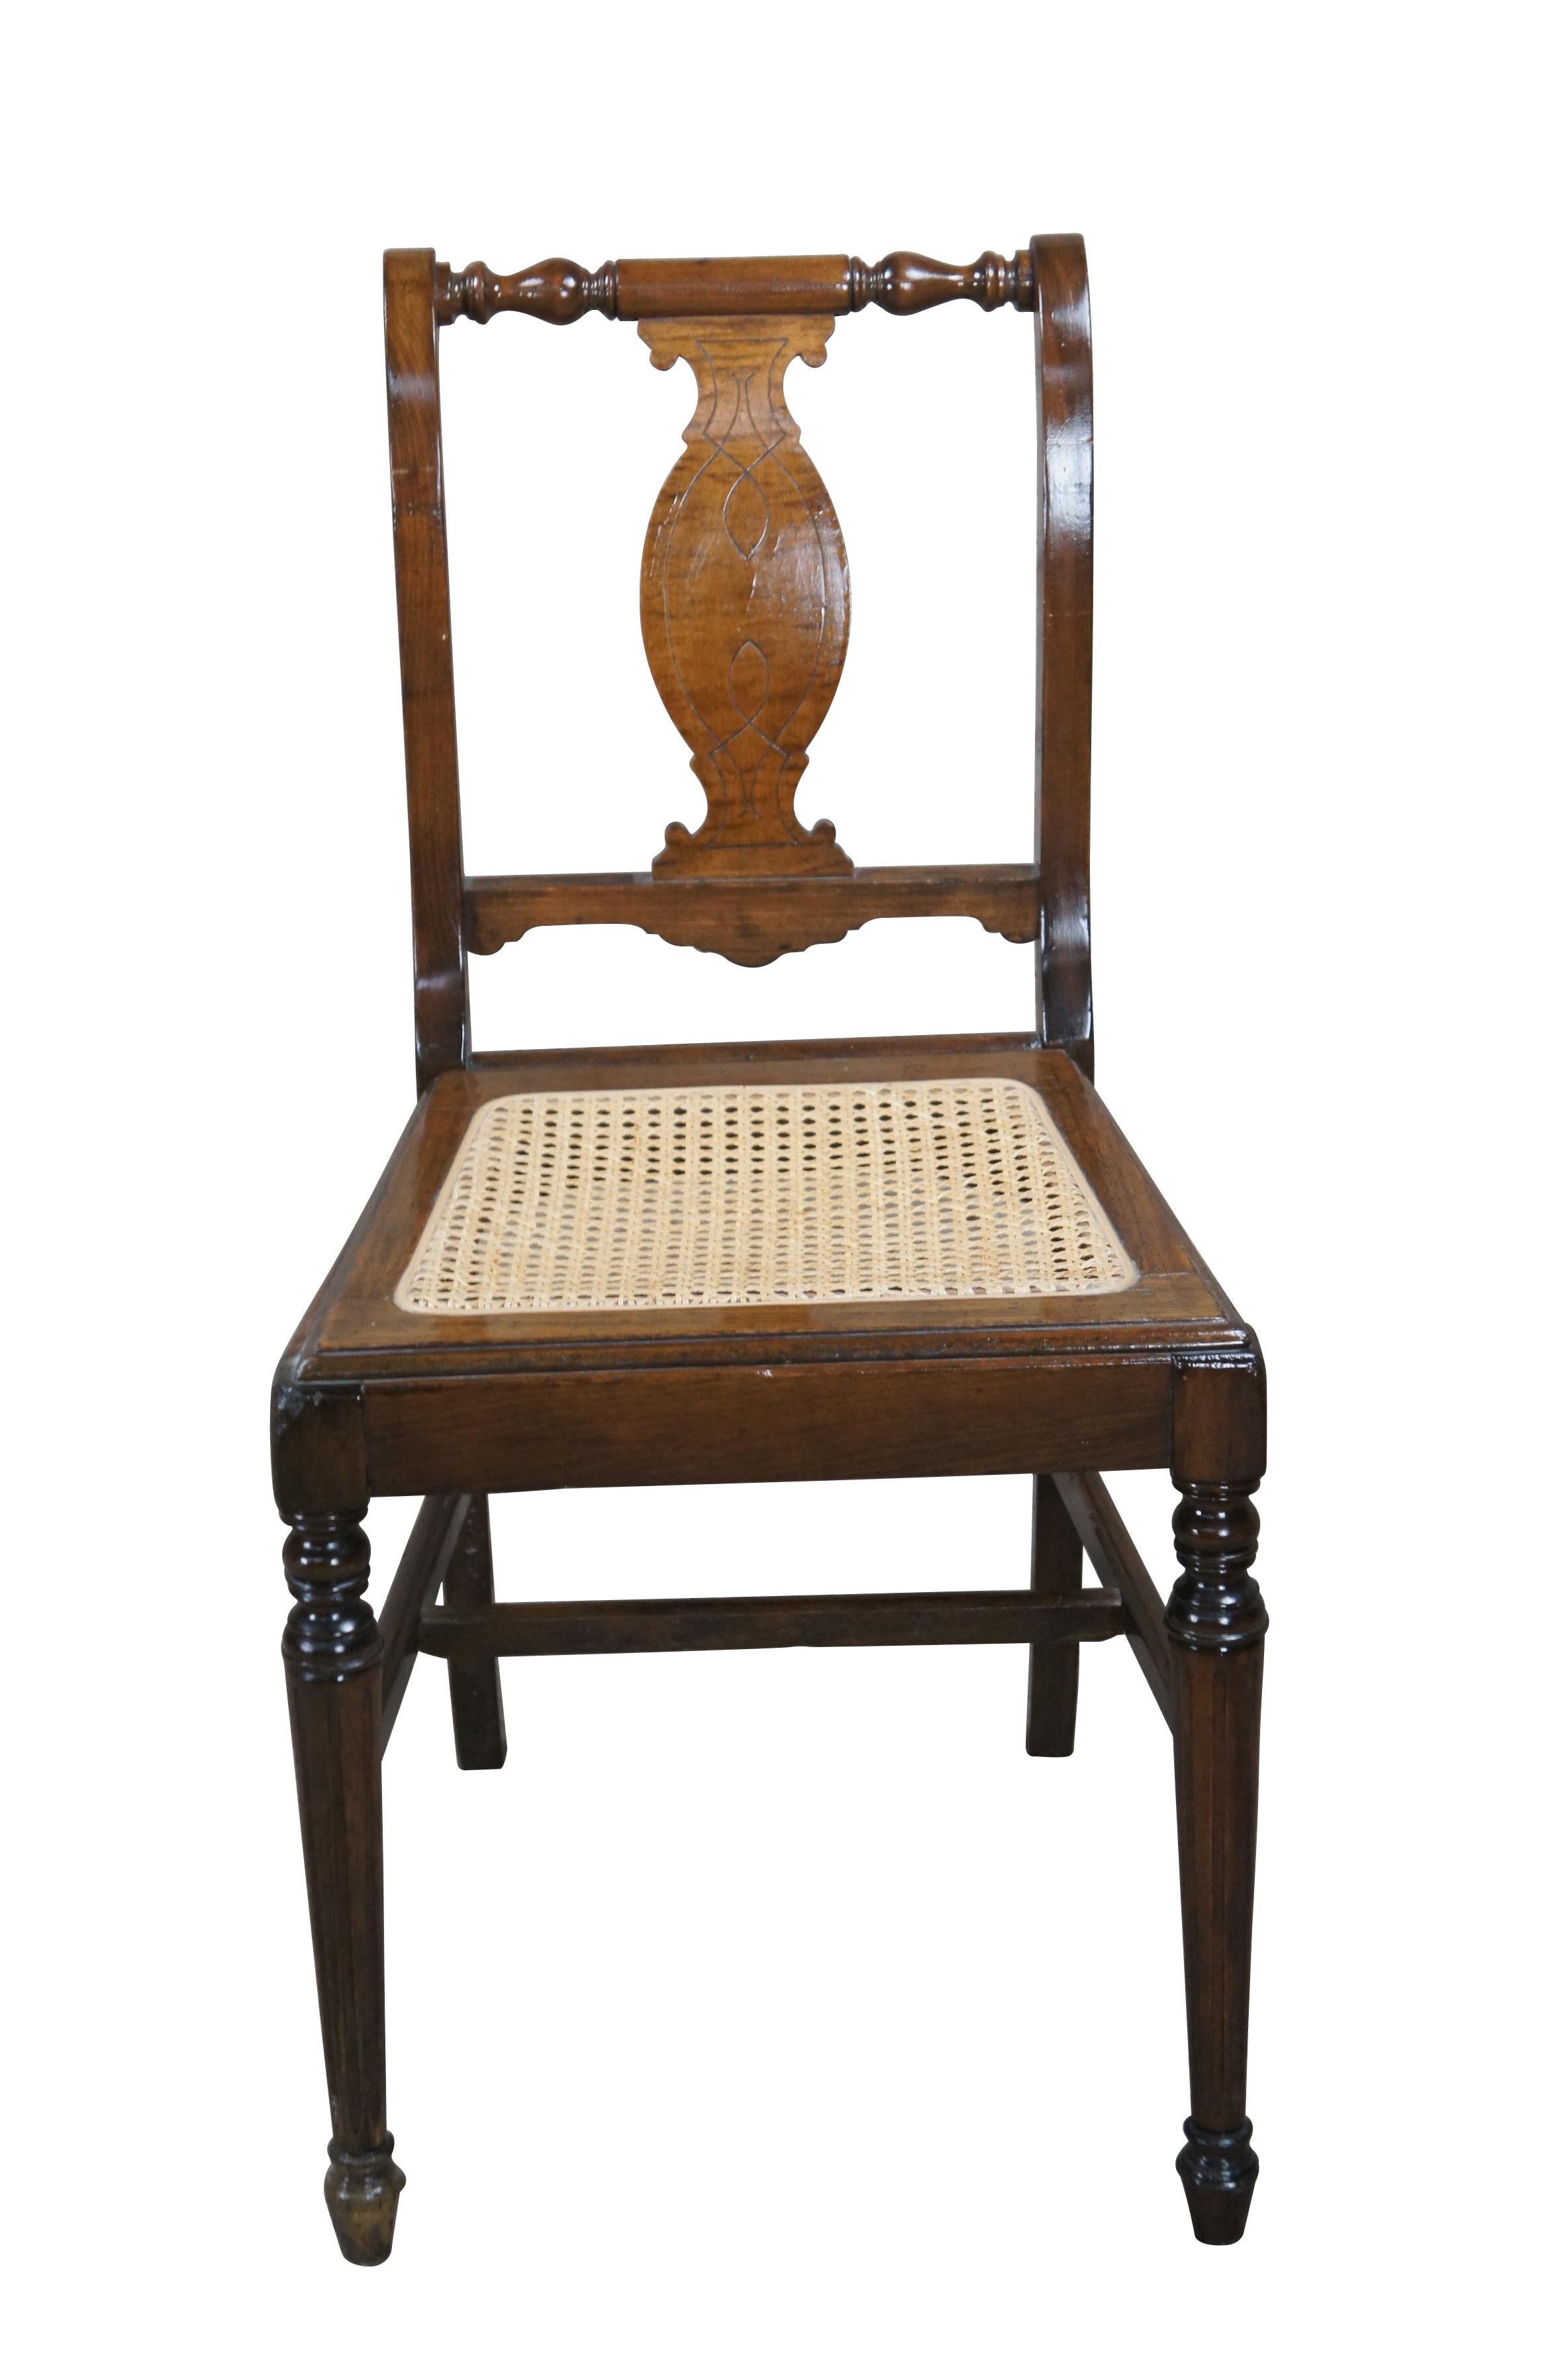 Antique Federal side chair.  Made from mahogany with curly mahogany back splat.  Features a scrolled form with turned crest rail and cane seat.  Front turned legs are connected to the rear square tapered legs by an H stretcher.  Front feet are arrow